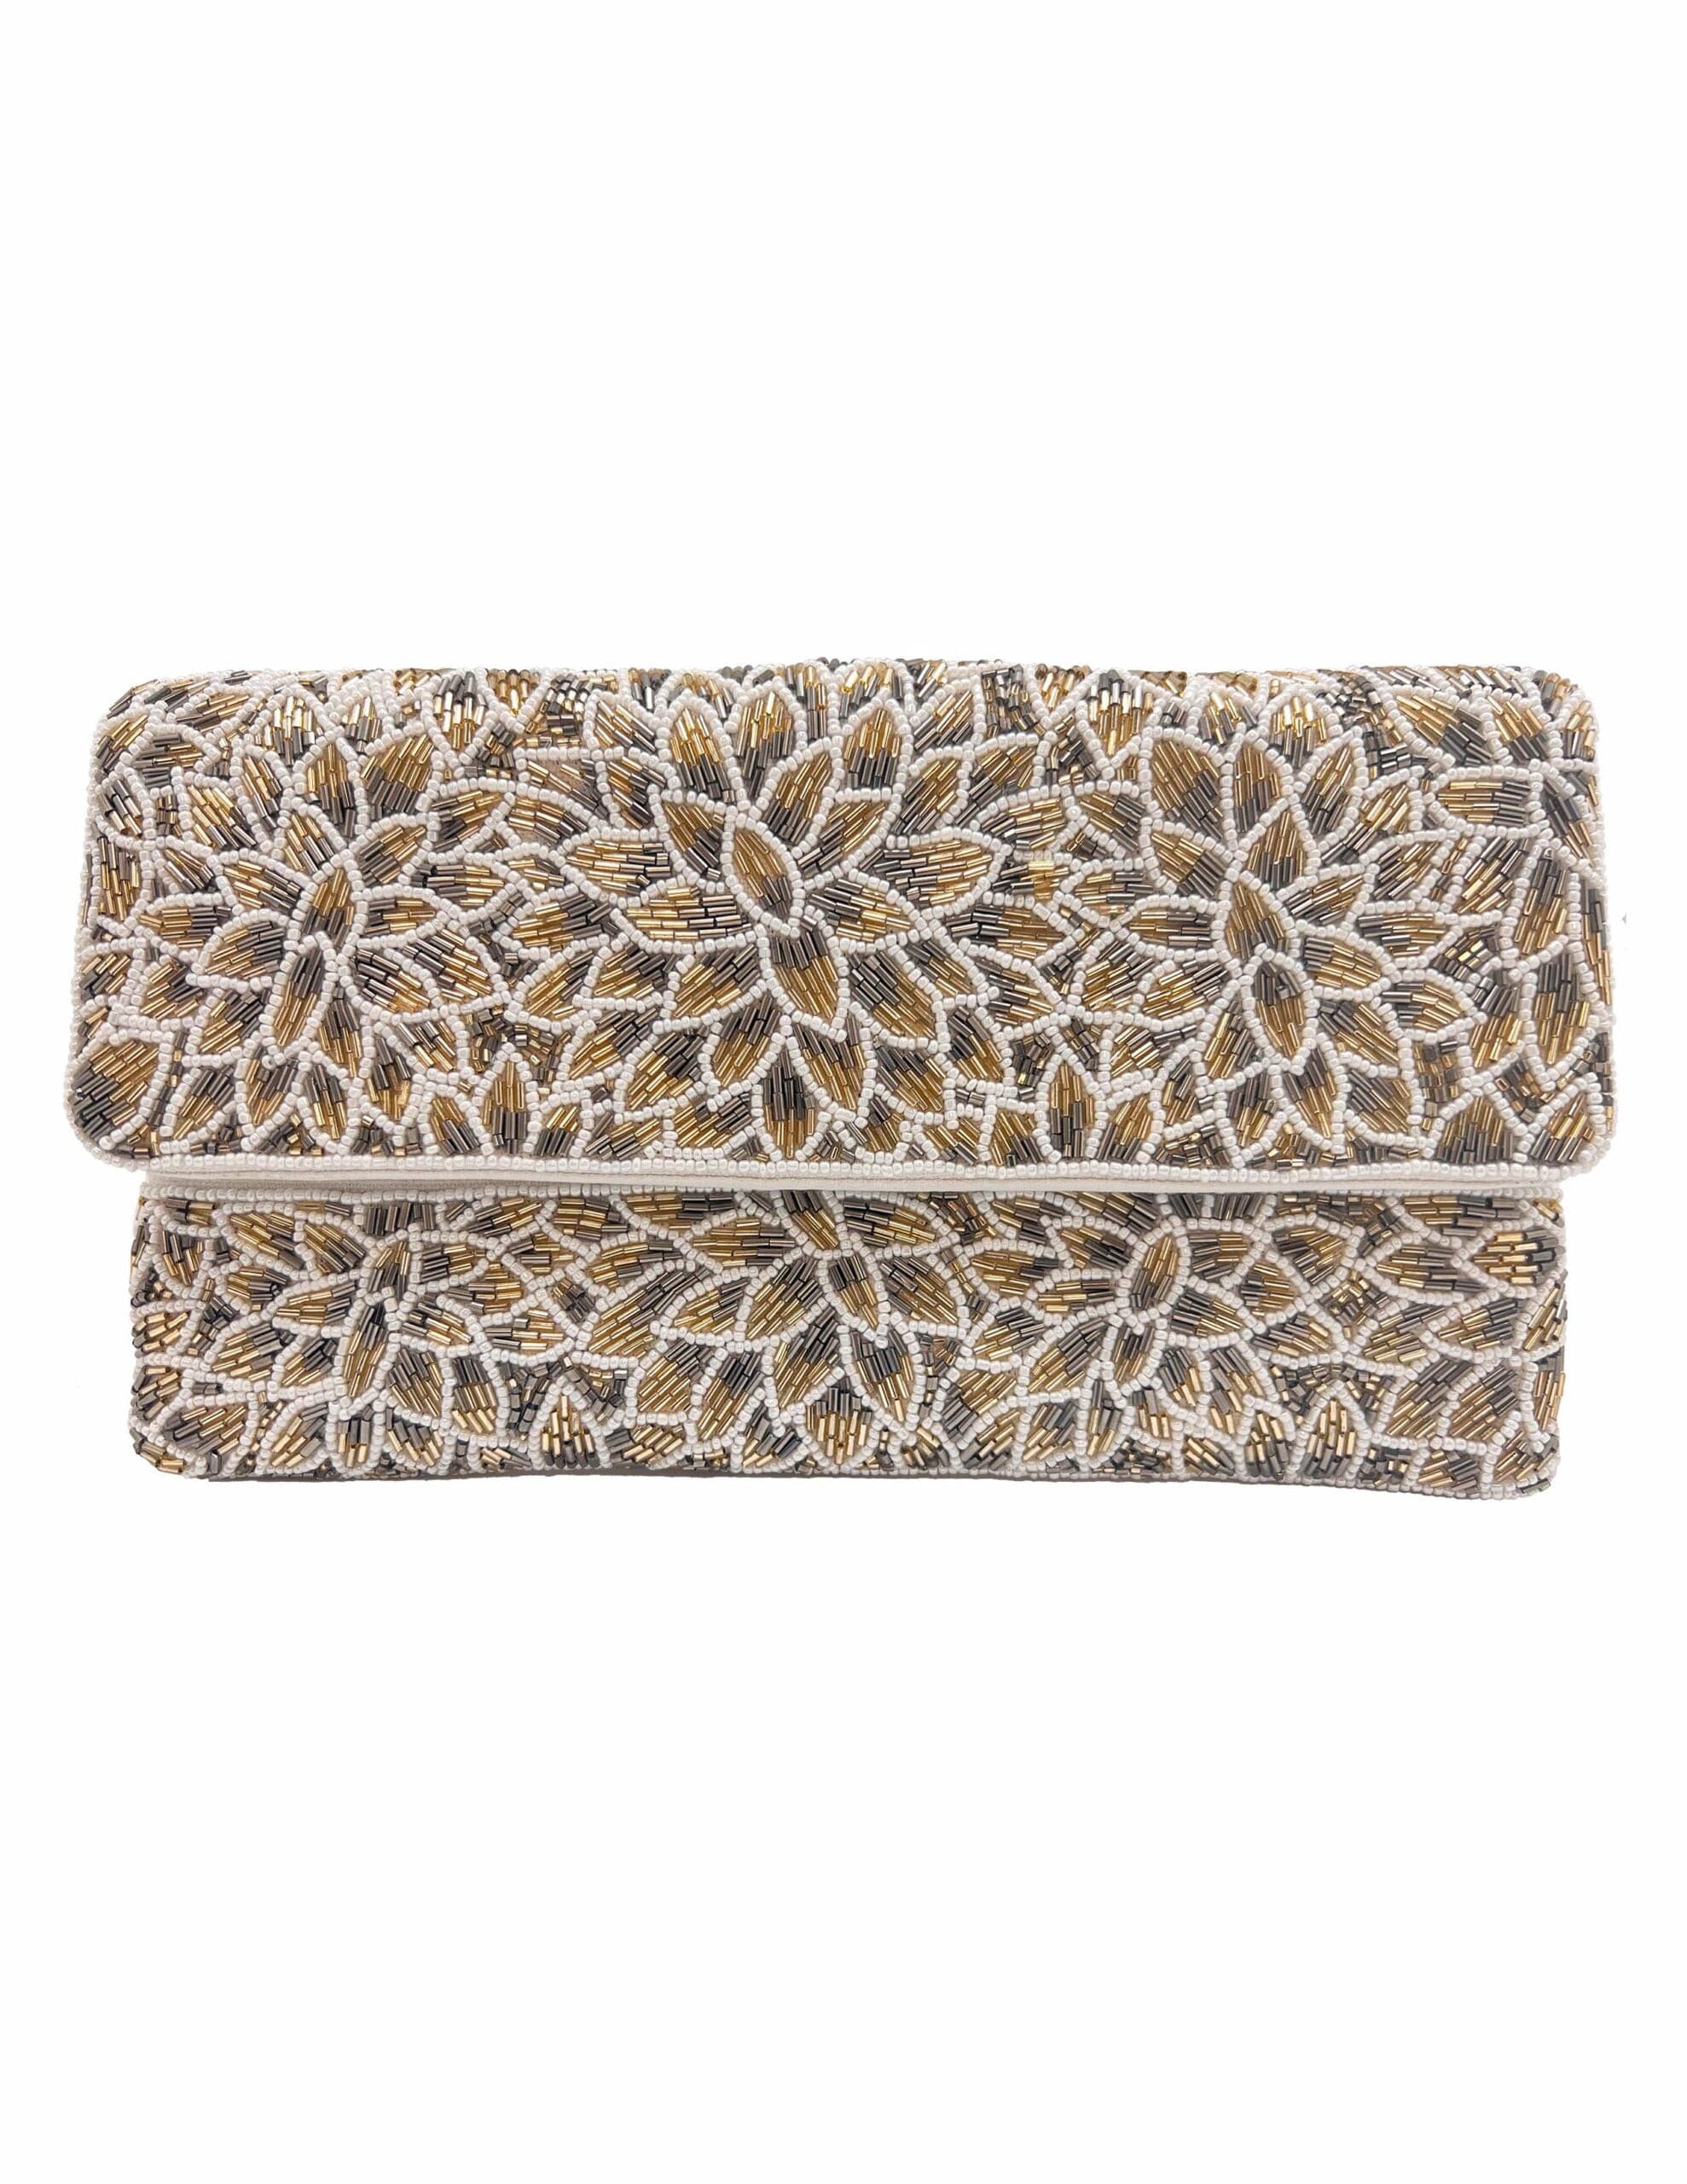 Silver & Gold Flowers Beaded Clutch.